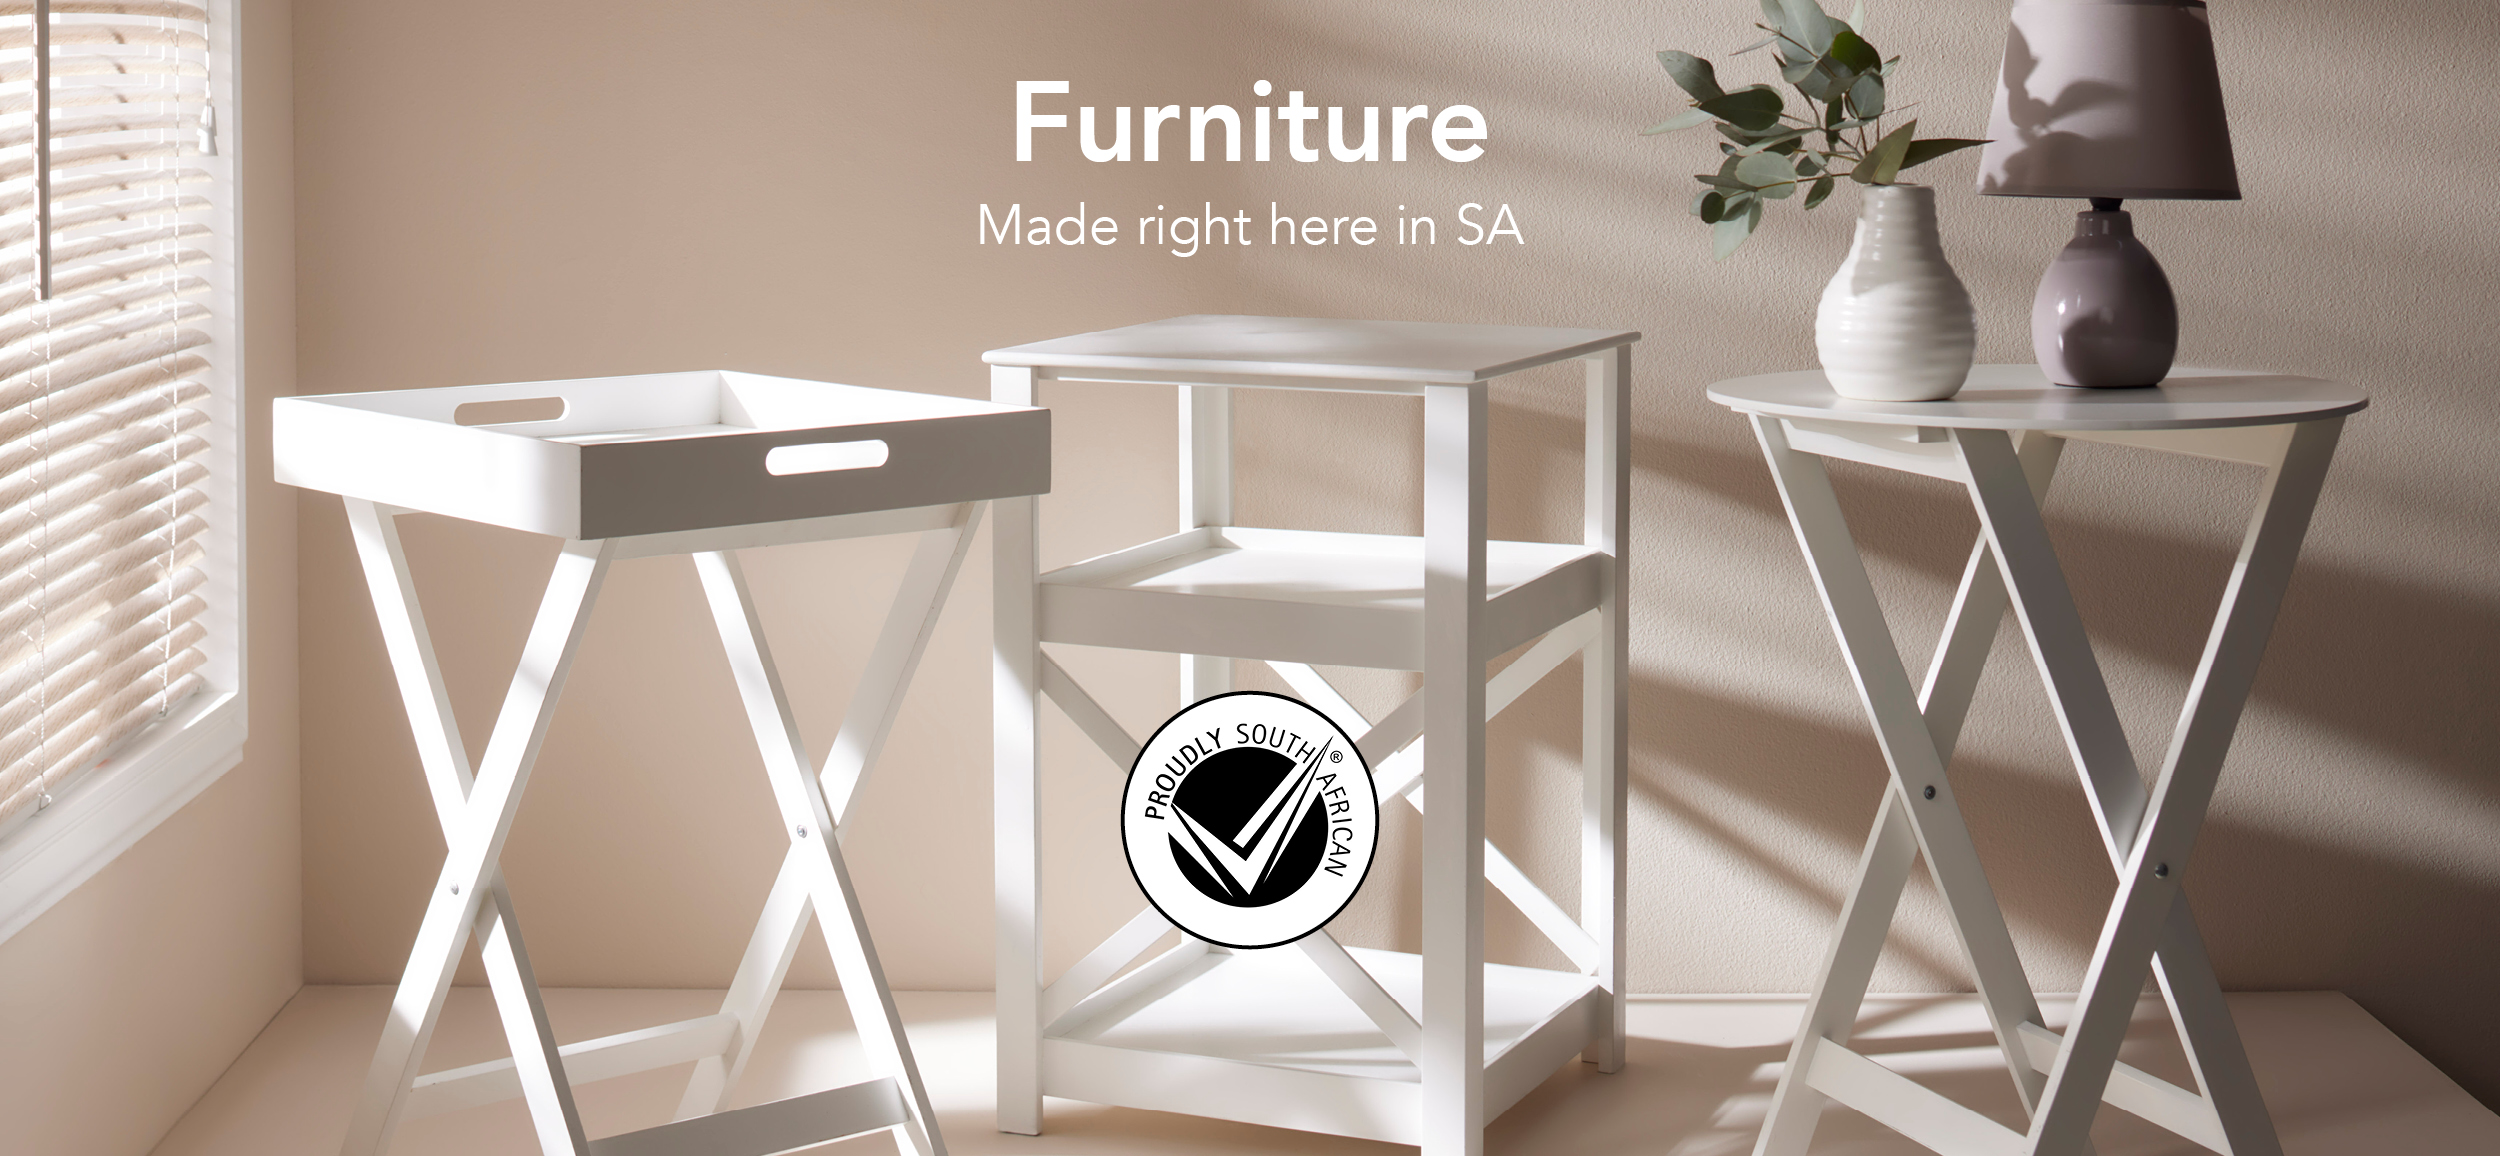 Furniture made right here in South Africa